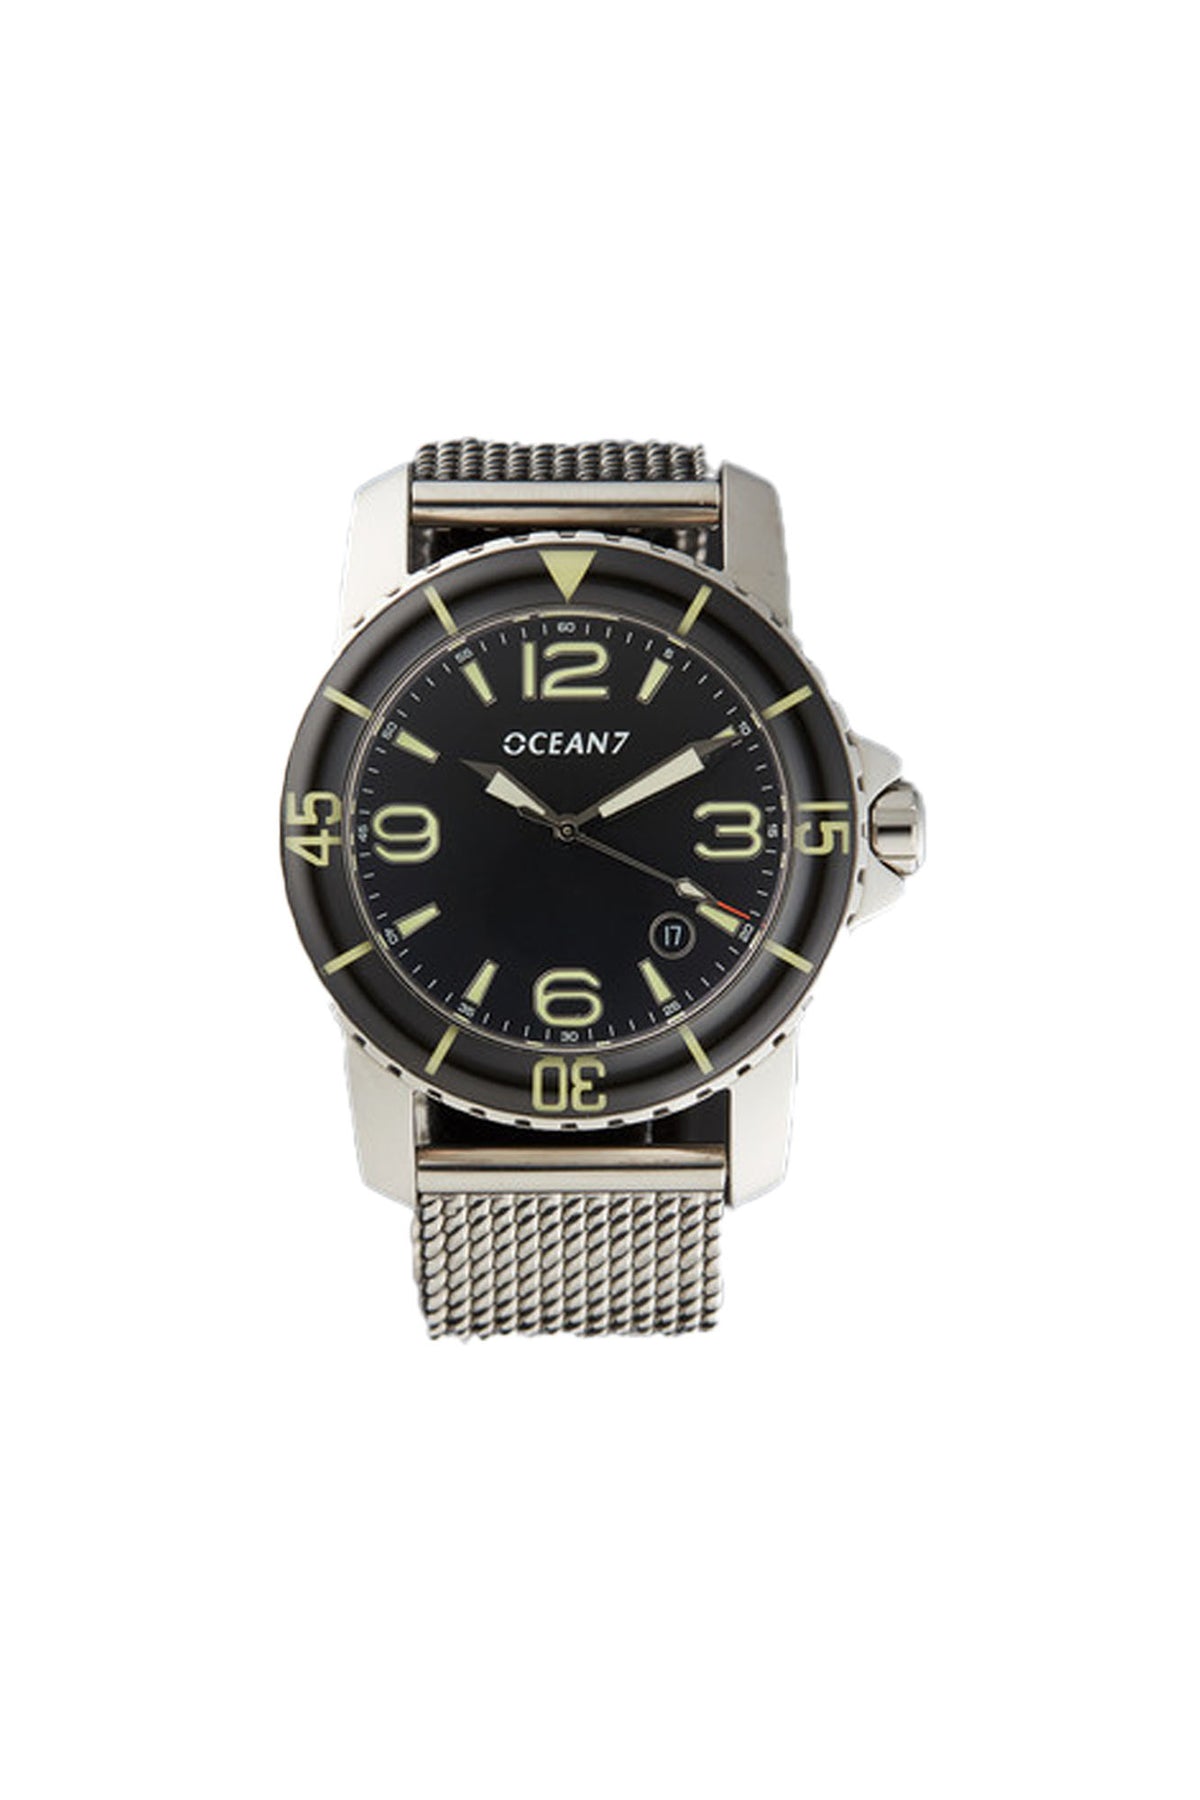 LM-5 Dress Diver with Domed Sapphire Bezel